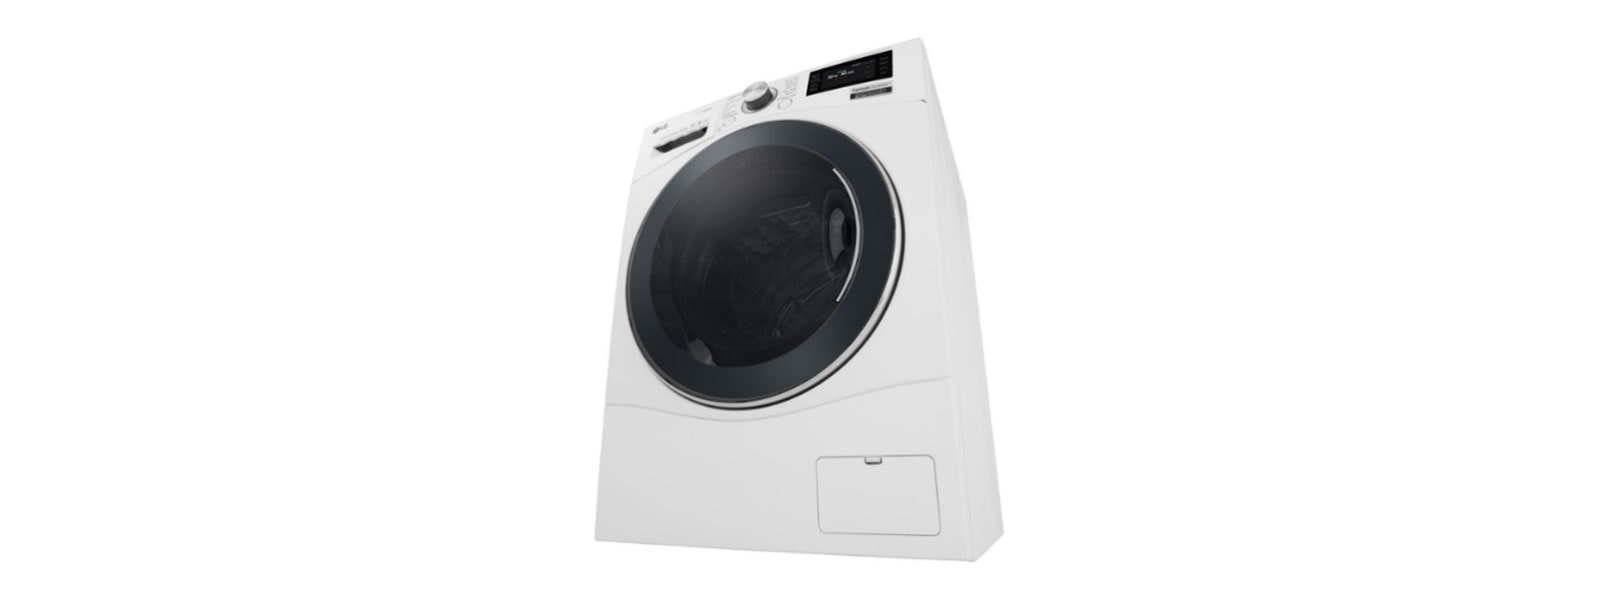 LG Washer Cleaning - How to Get the Best Results